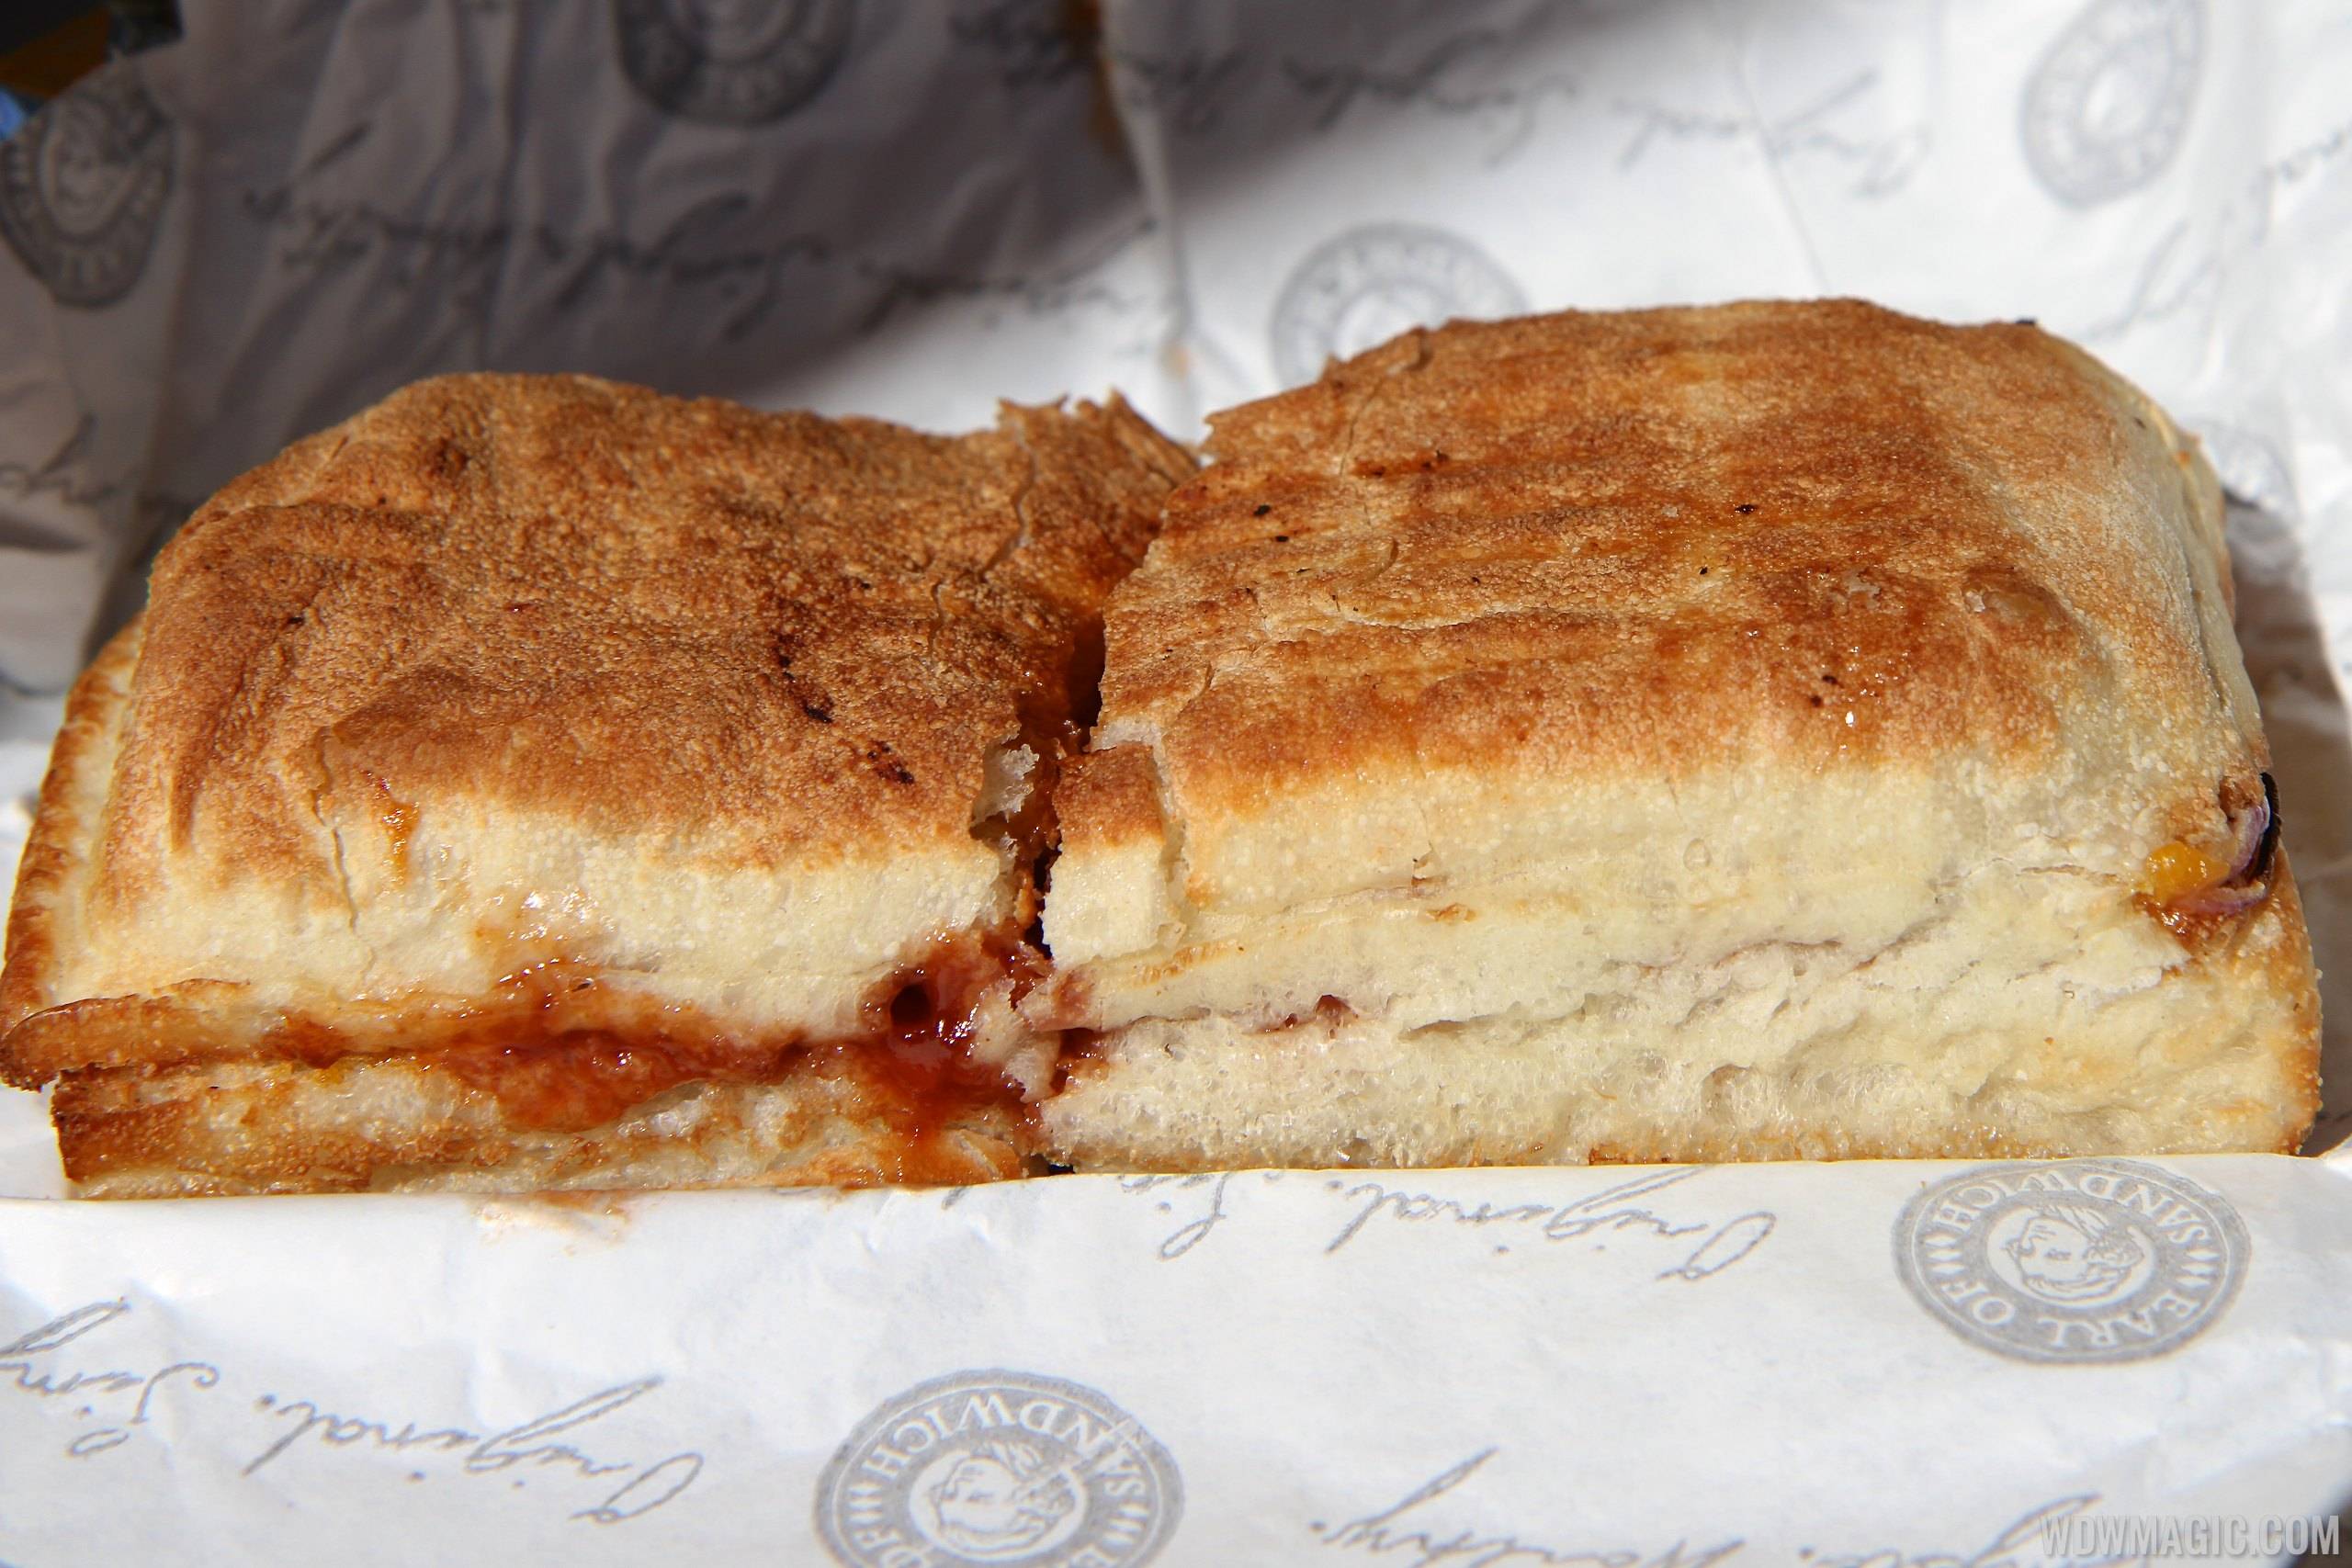 PHOTOS - Earl of Sandwich offers two new limited time sandwiches